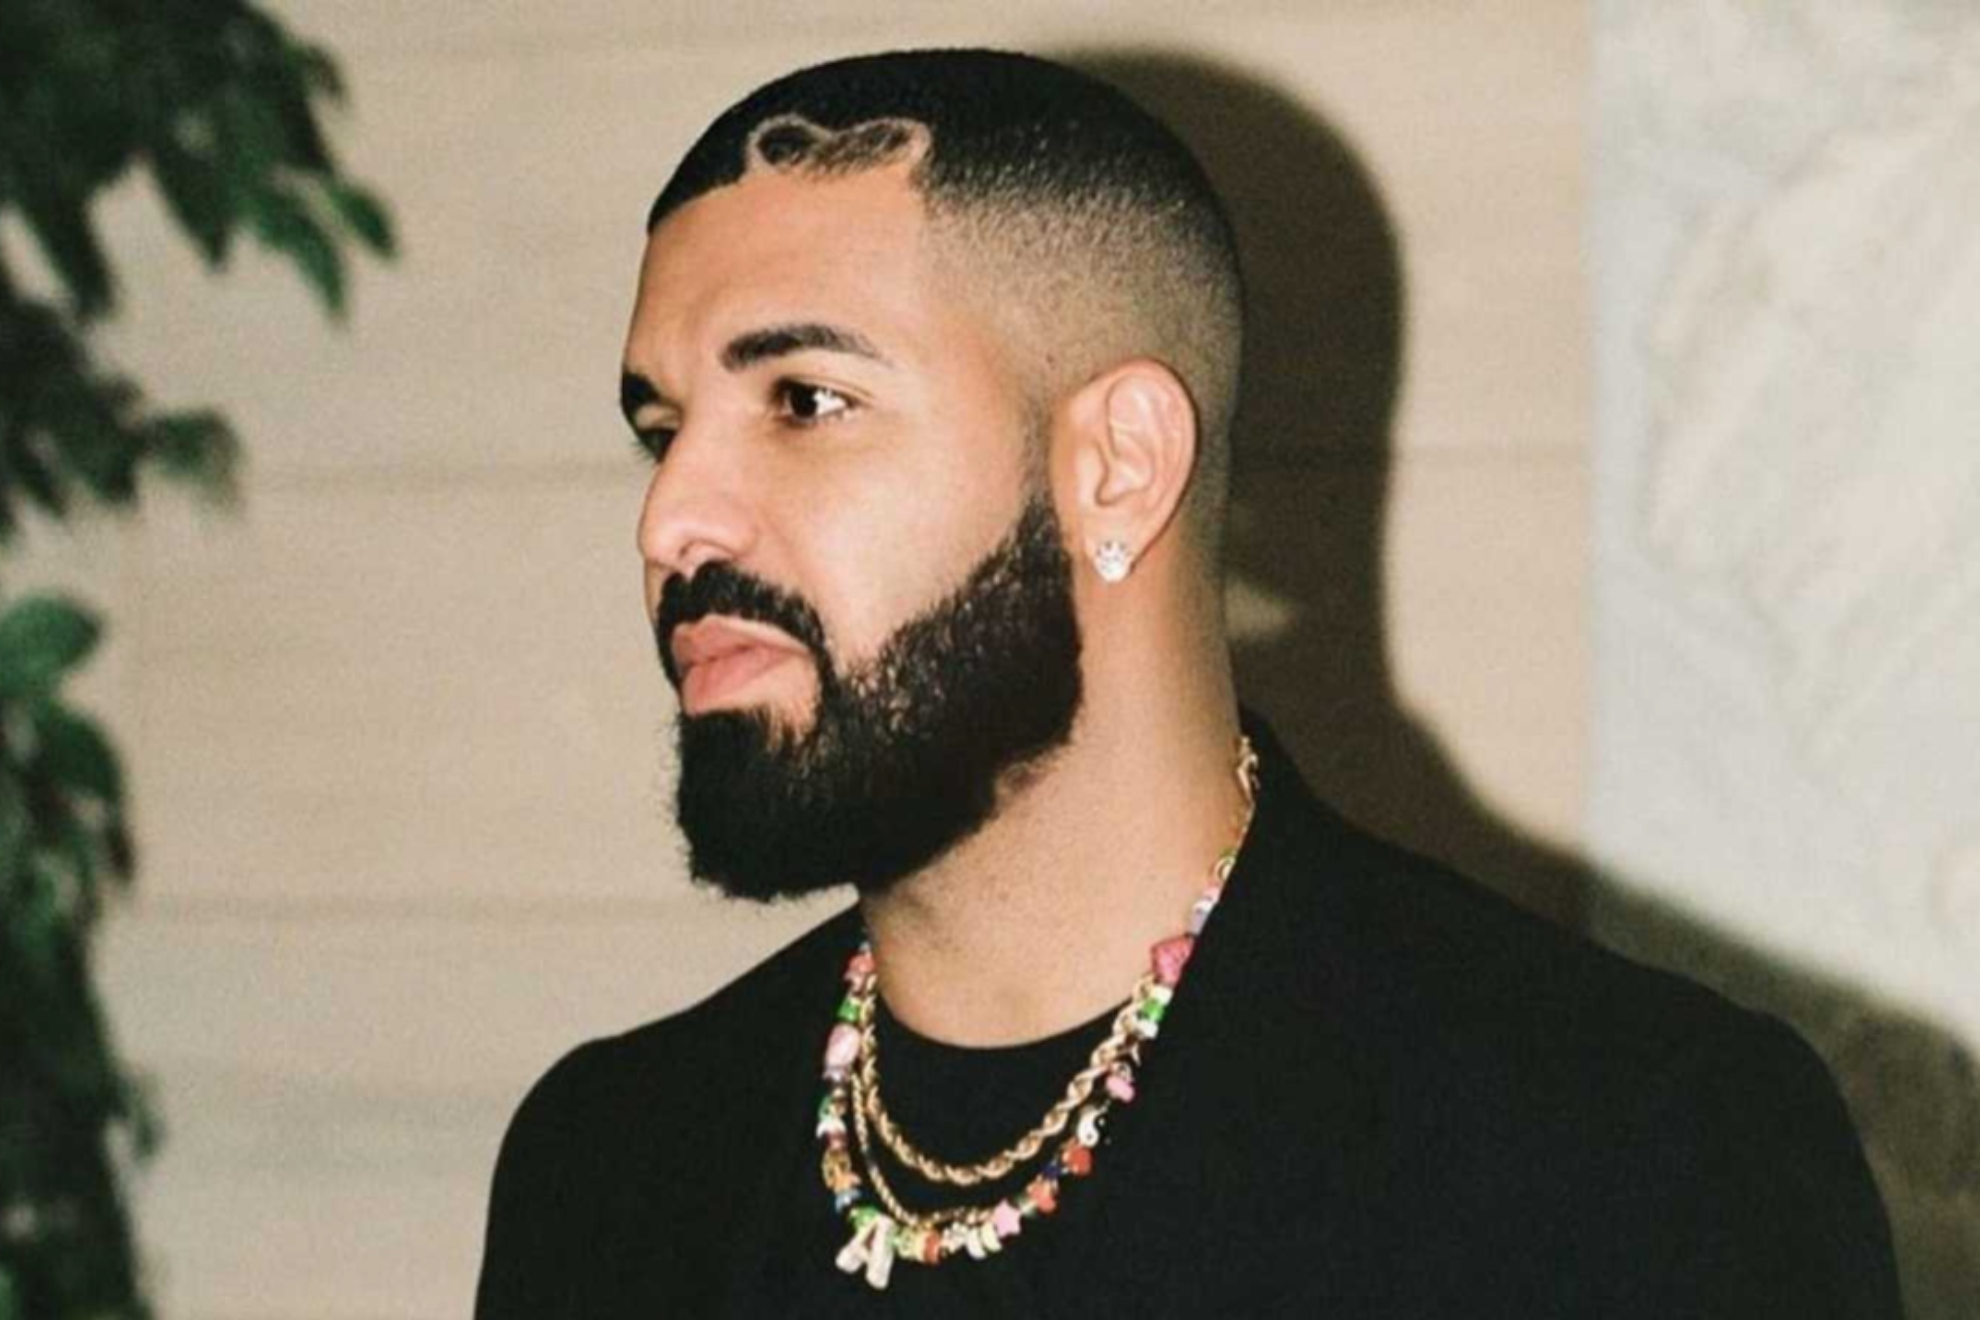 Drake's new face tattoo raises eyebrows as fans wonder about the meaning